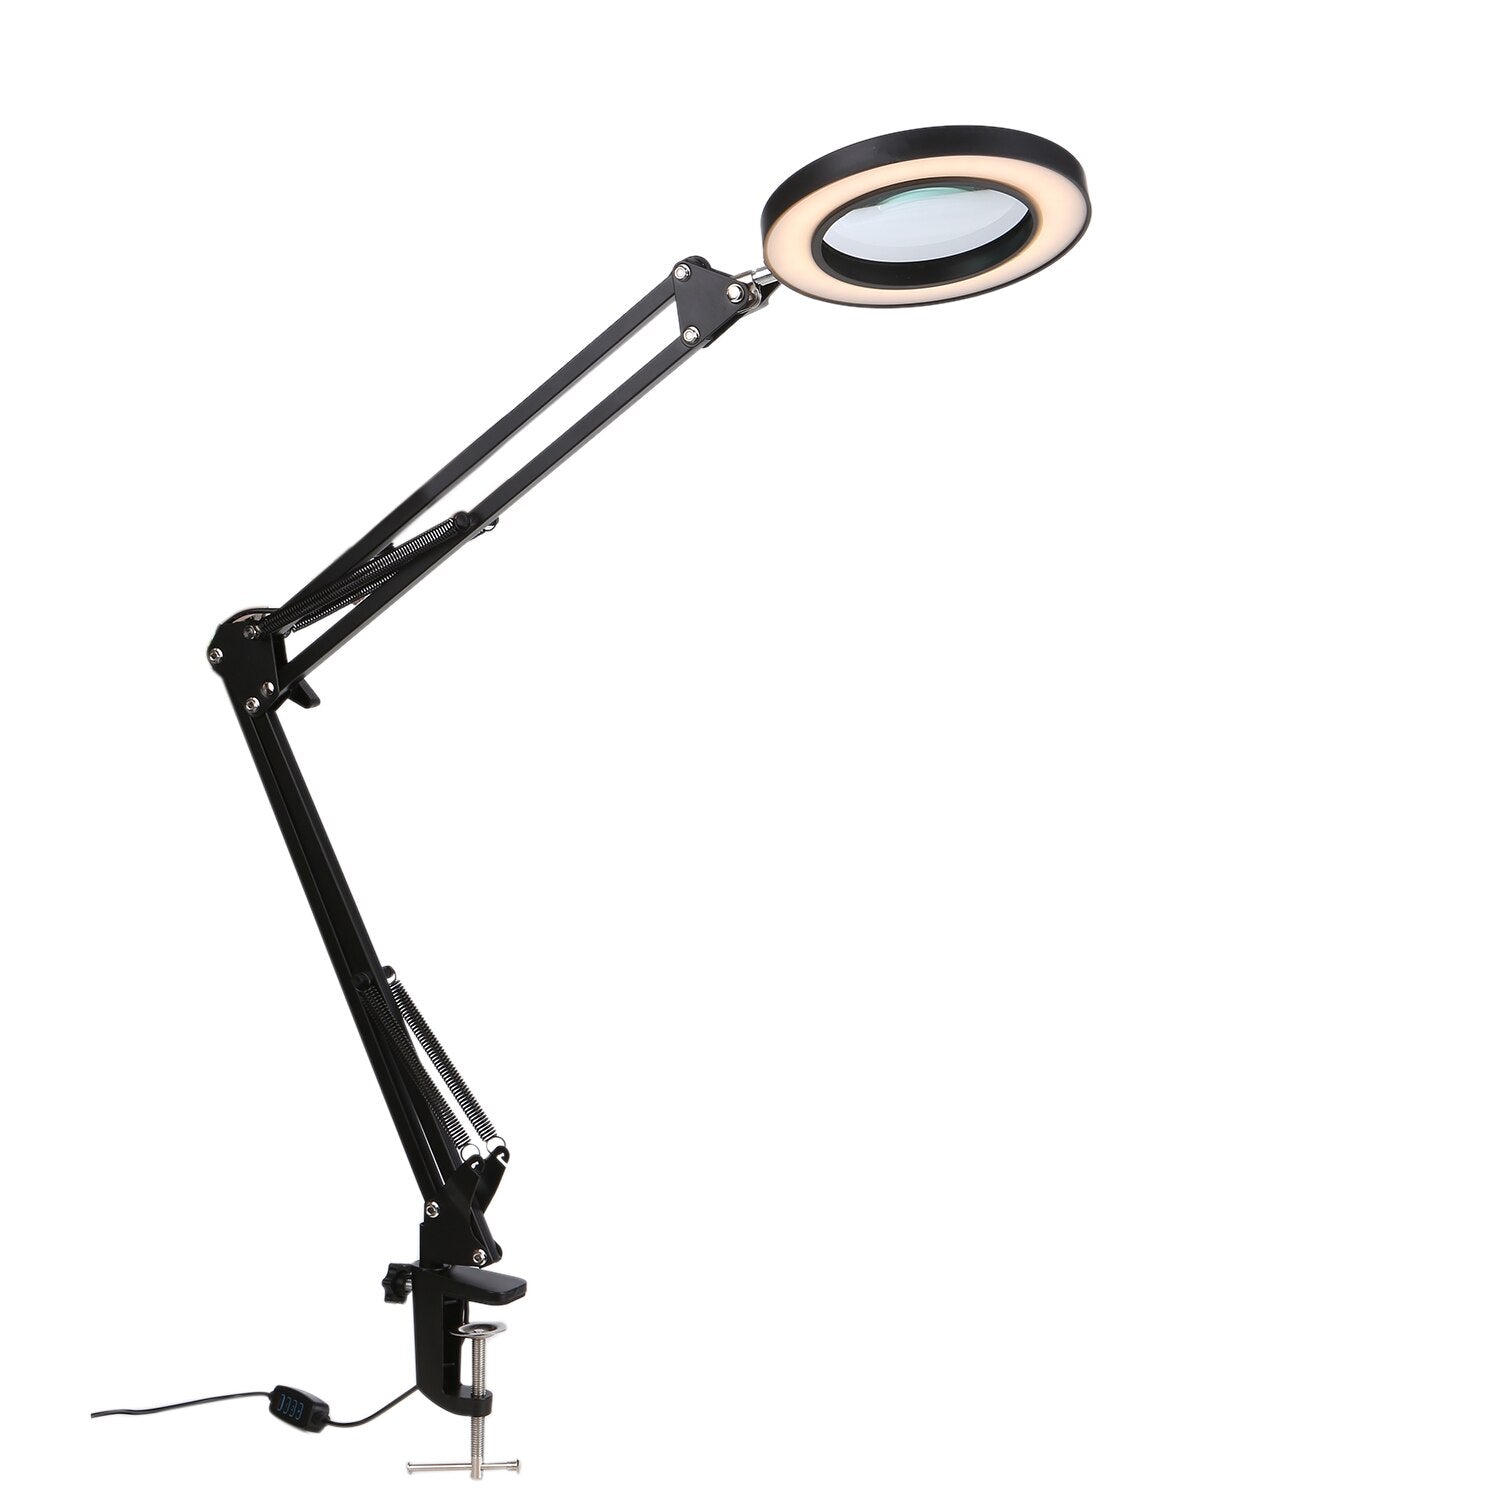 Flexible LED Lighted Magnifying Desk Glass Lamp - Westfield Retailers